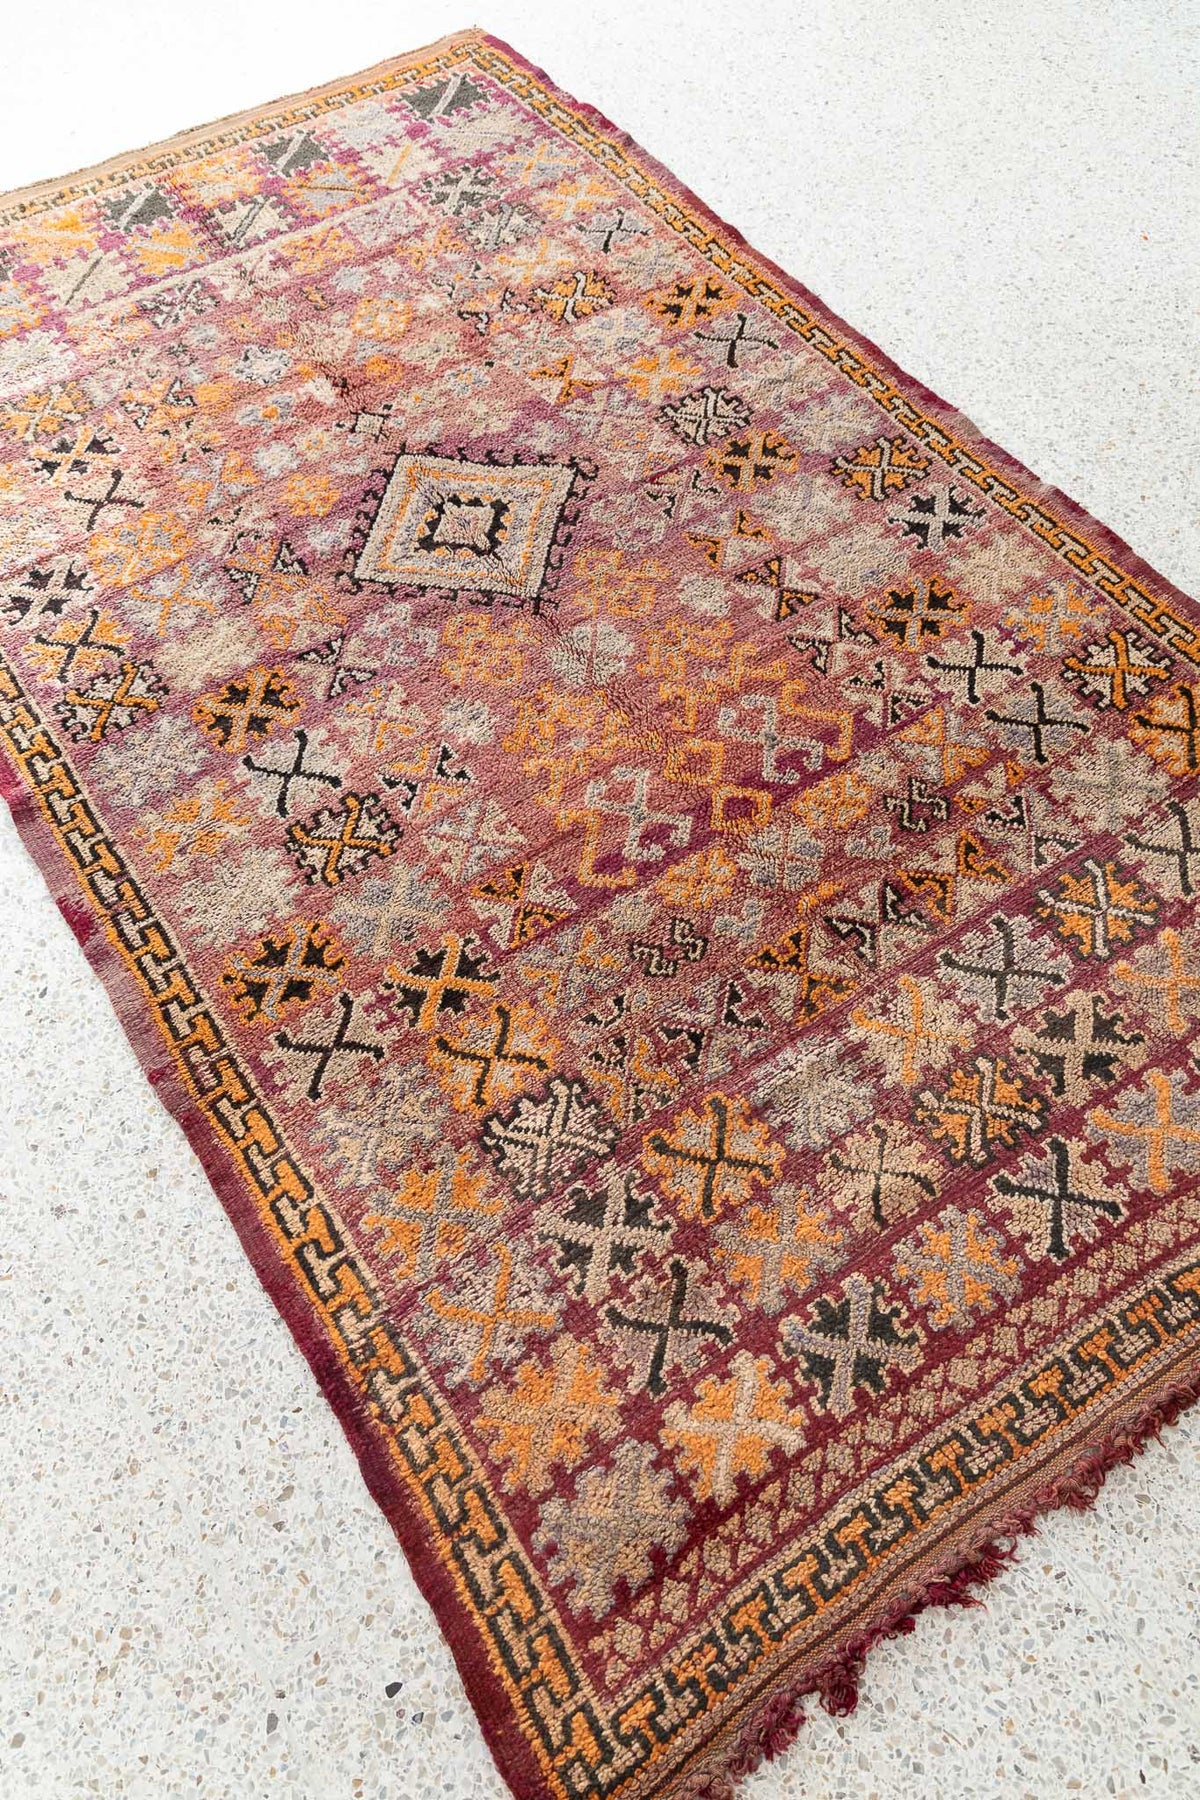 This vintage Moroccan rug is a true masterpiece, with its intricate patterns and beautiful color palette. It may come from a Boujaad, Ait Yacoub or Zemmour tribe. The carpet is a real feast for the eyes, with a mixture of colors and Berber signs in a sophisticated and elegant composition. The design is dense and intricate, with a symmetrical pattern that has variations in the organization of the composition. Faded color palette from rosy to orange, beige and dark.